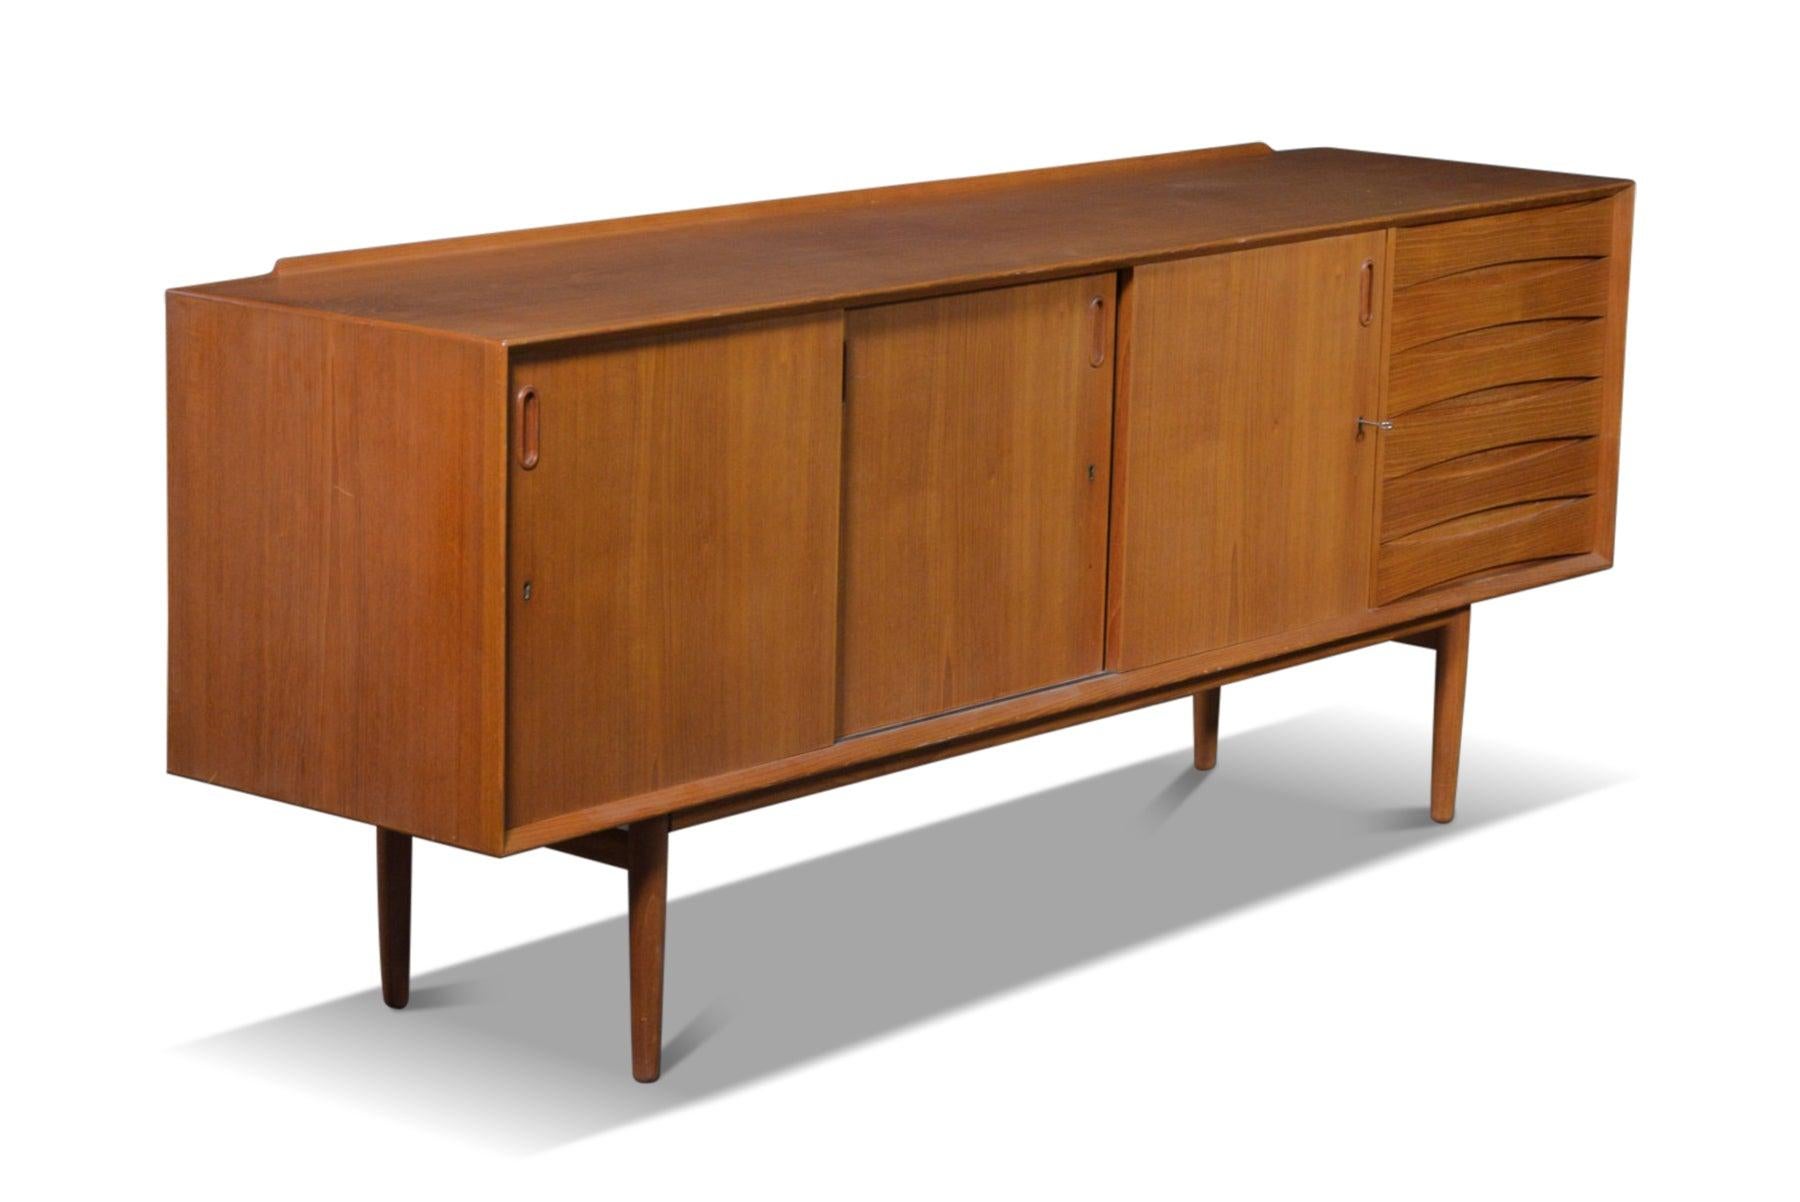 Large Vodder Style Teak Credenza with Keeler Edge In Excellent Condition For Sale In Berkeley, CA